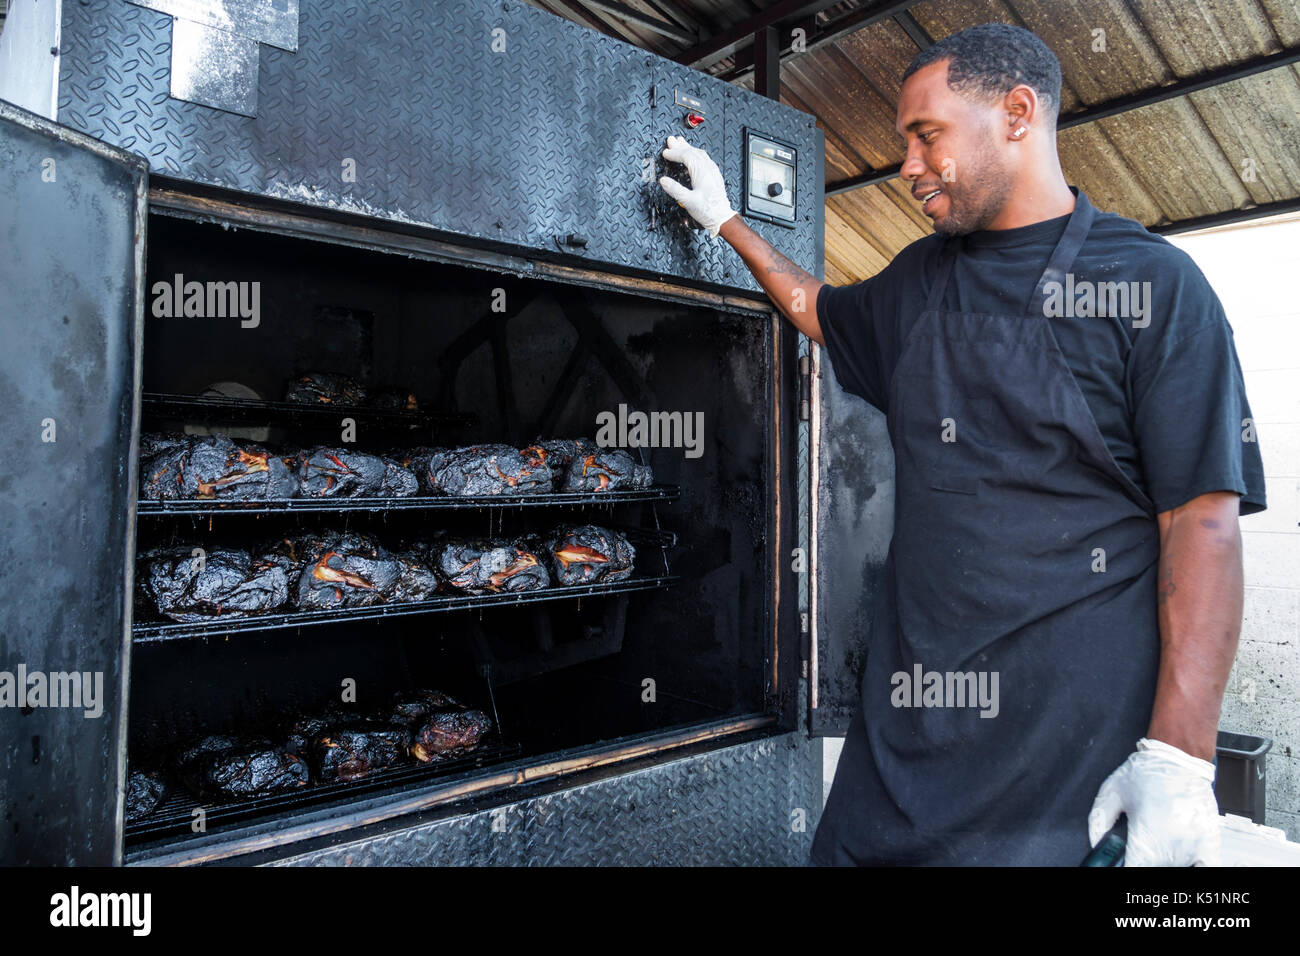 Georgia,St. Simons Island,Southern Soul Barbeque, restaurant,BBQ,outdoor smoker,Black,man men male,cook,cooked meat,USA US United States America North Stock Photo